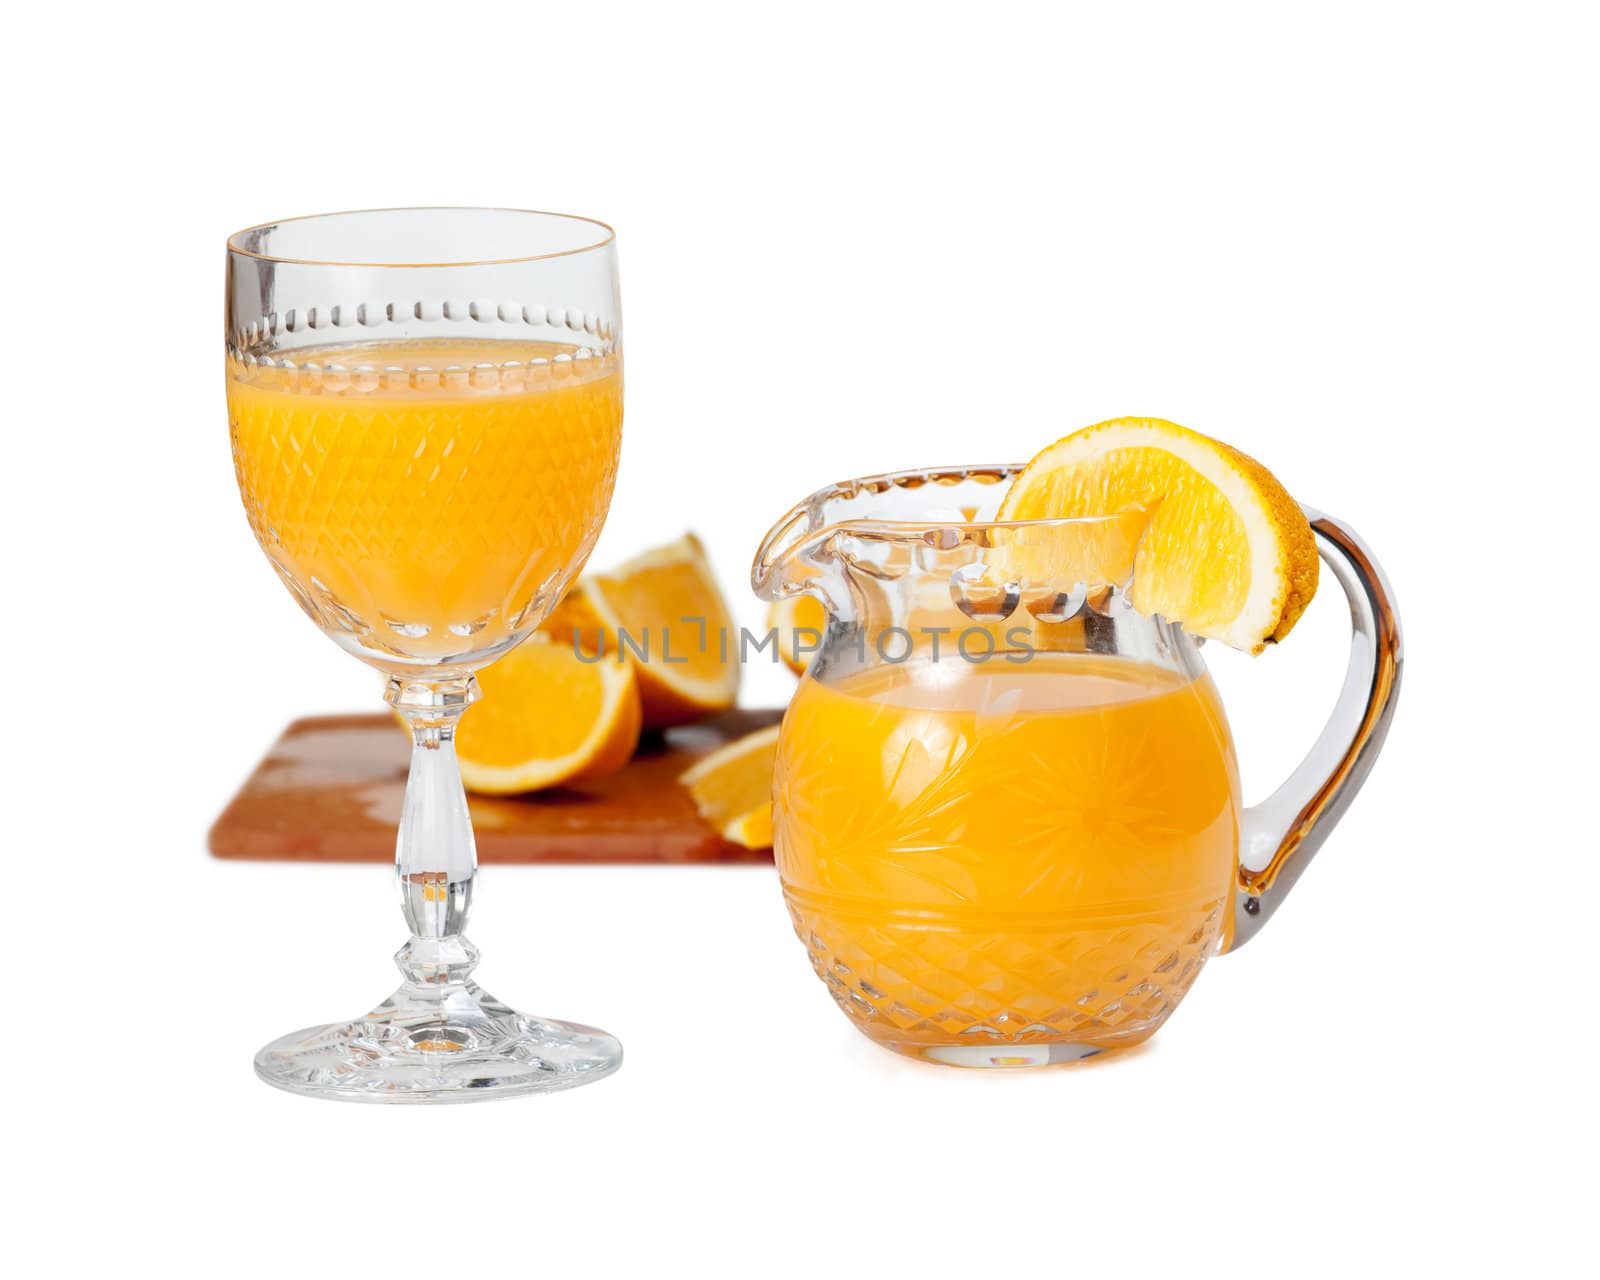 Glass and jug filled with orange juice by steheap